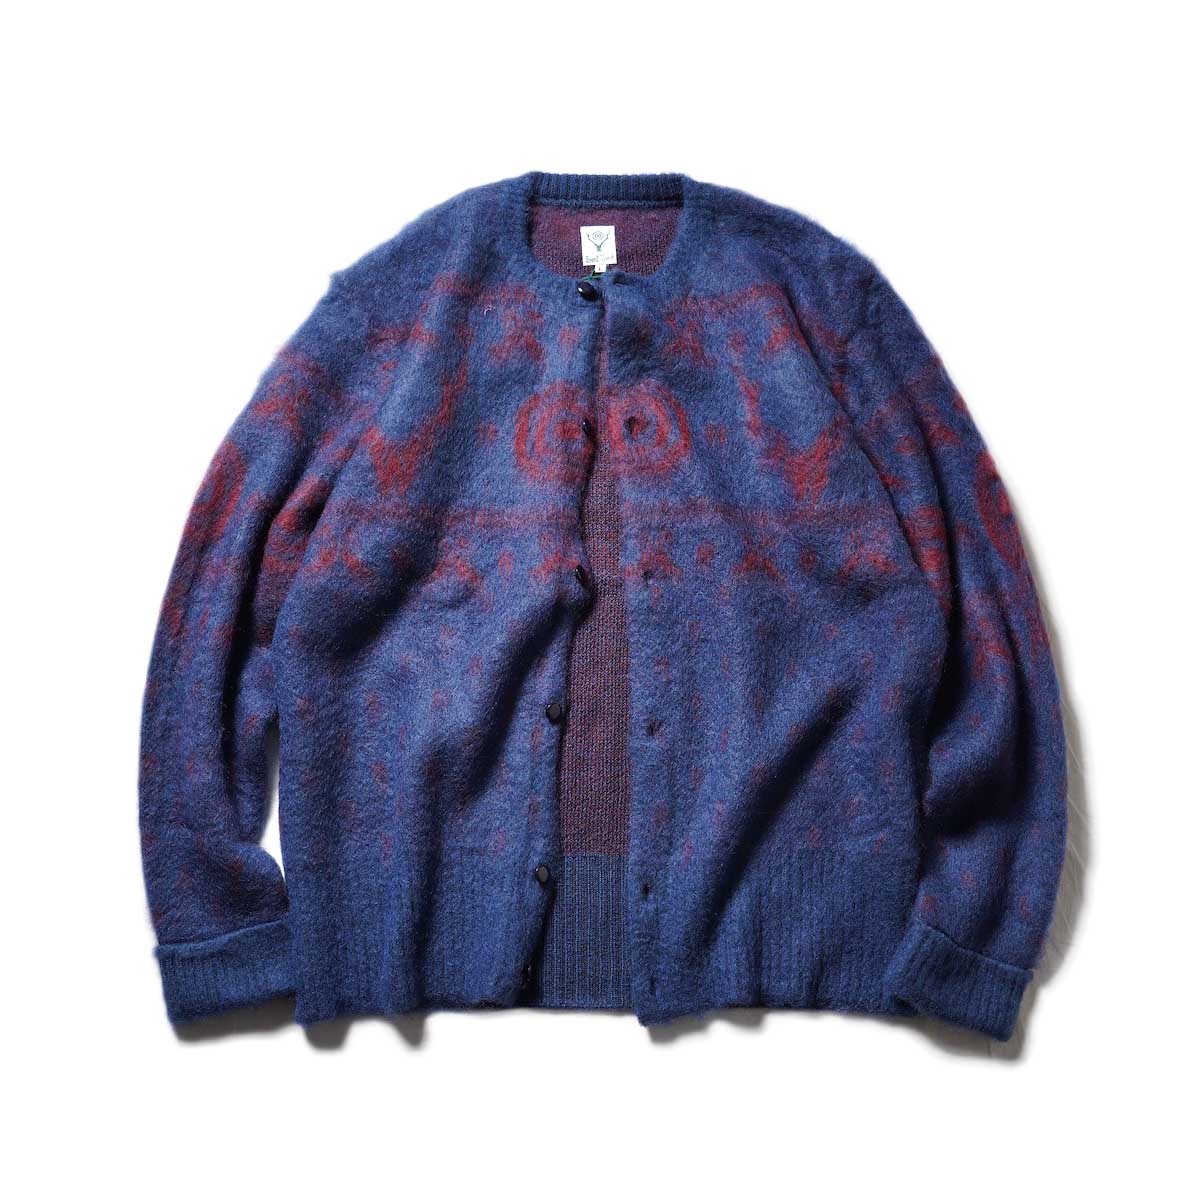 South2 West8 / LOOSE FIT CREW NECK CARDIGAN - S2W8 NORDIC (Navy)